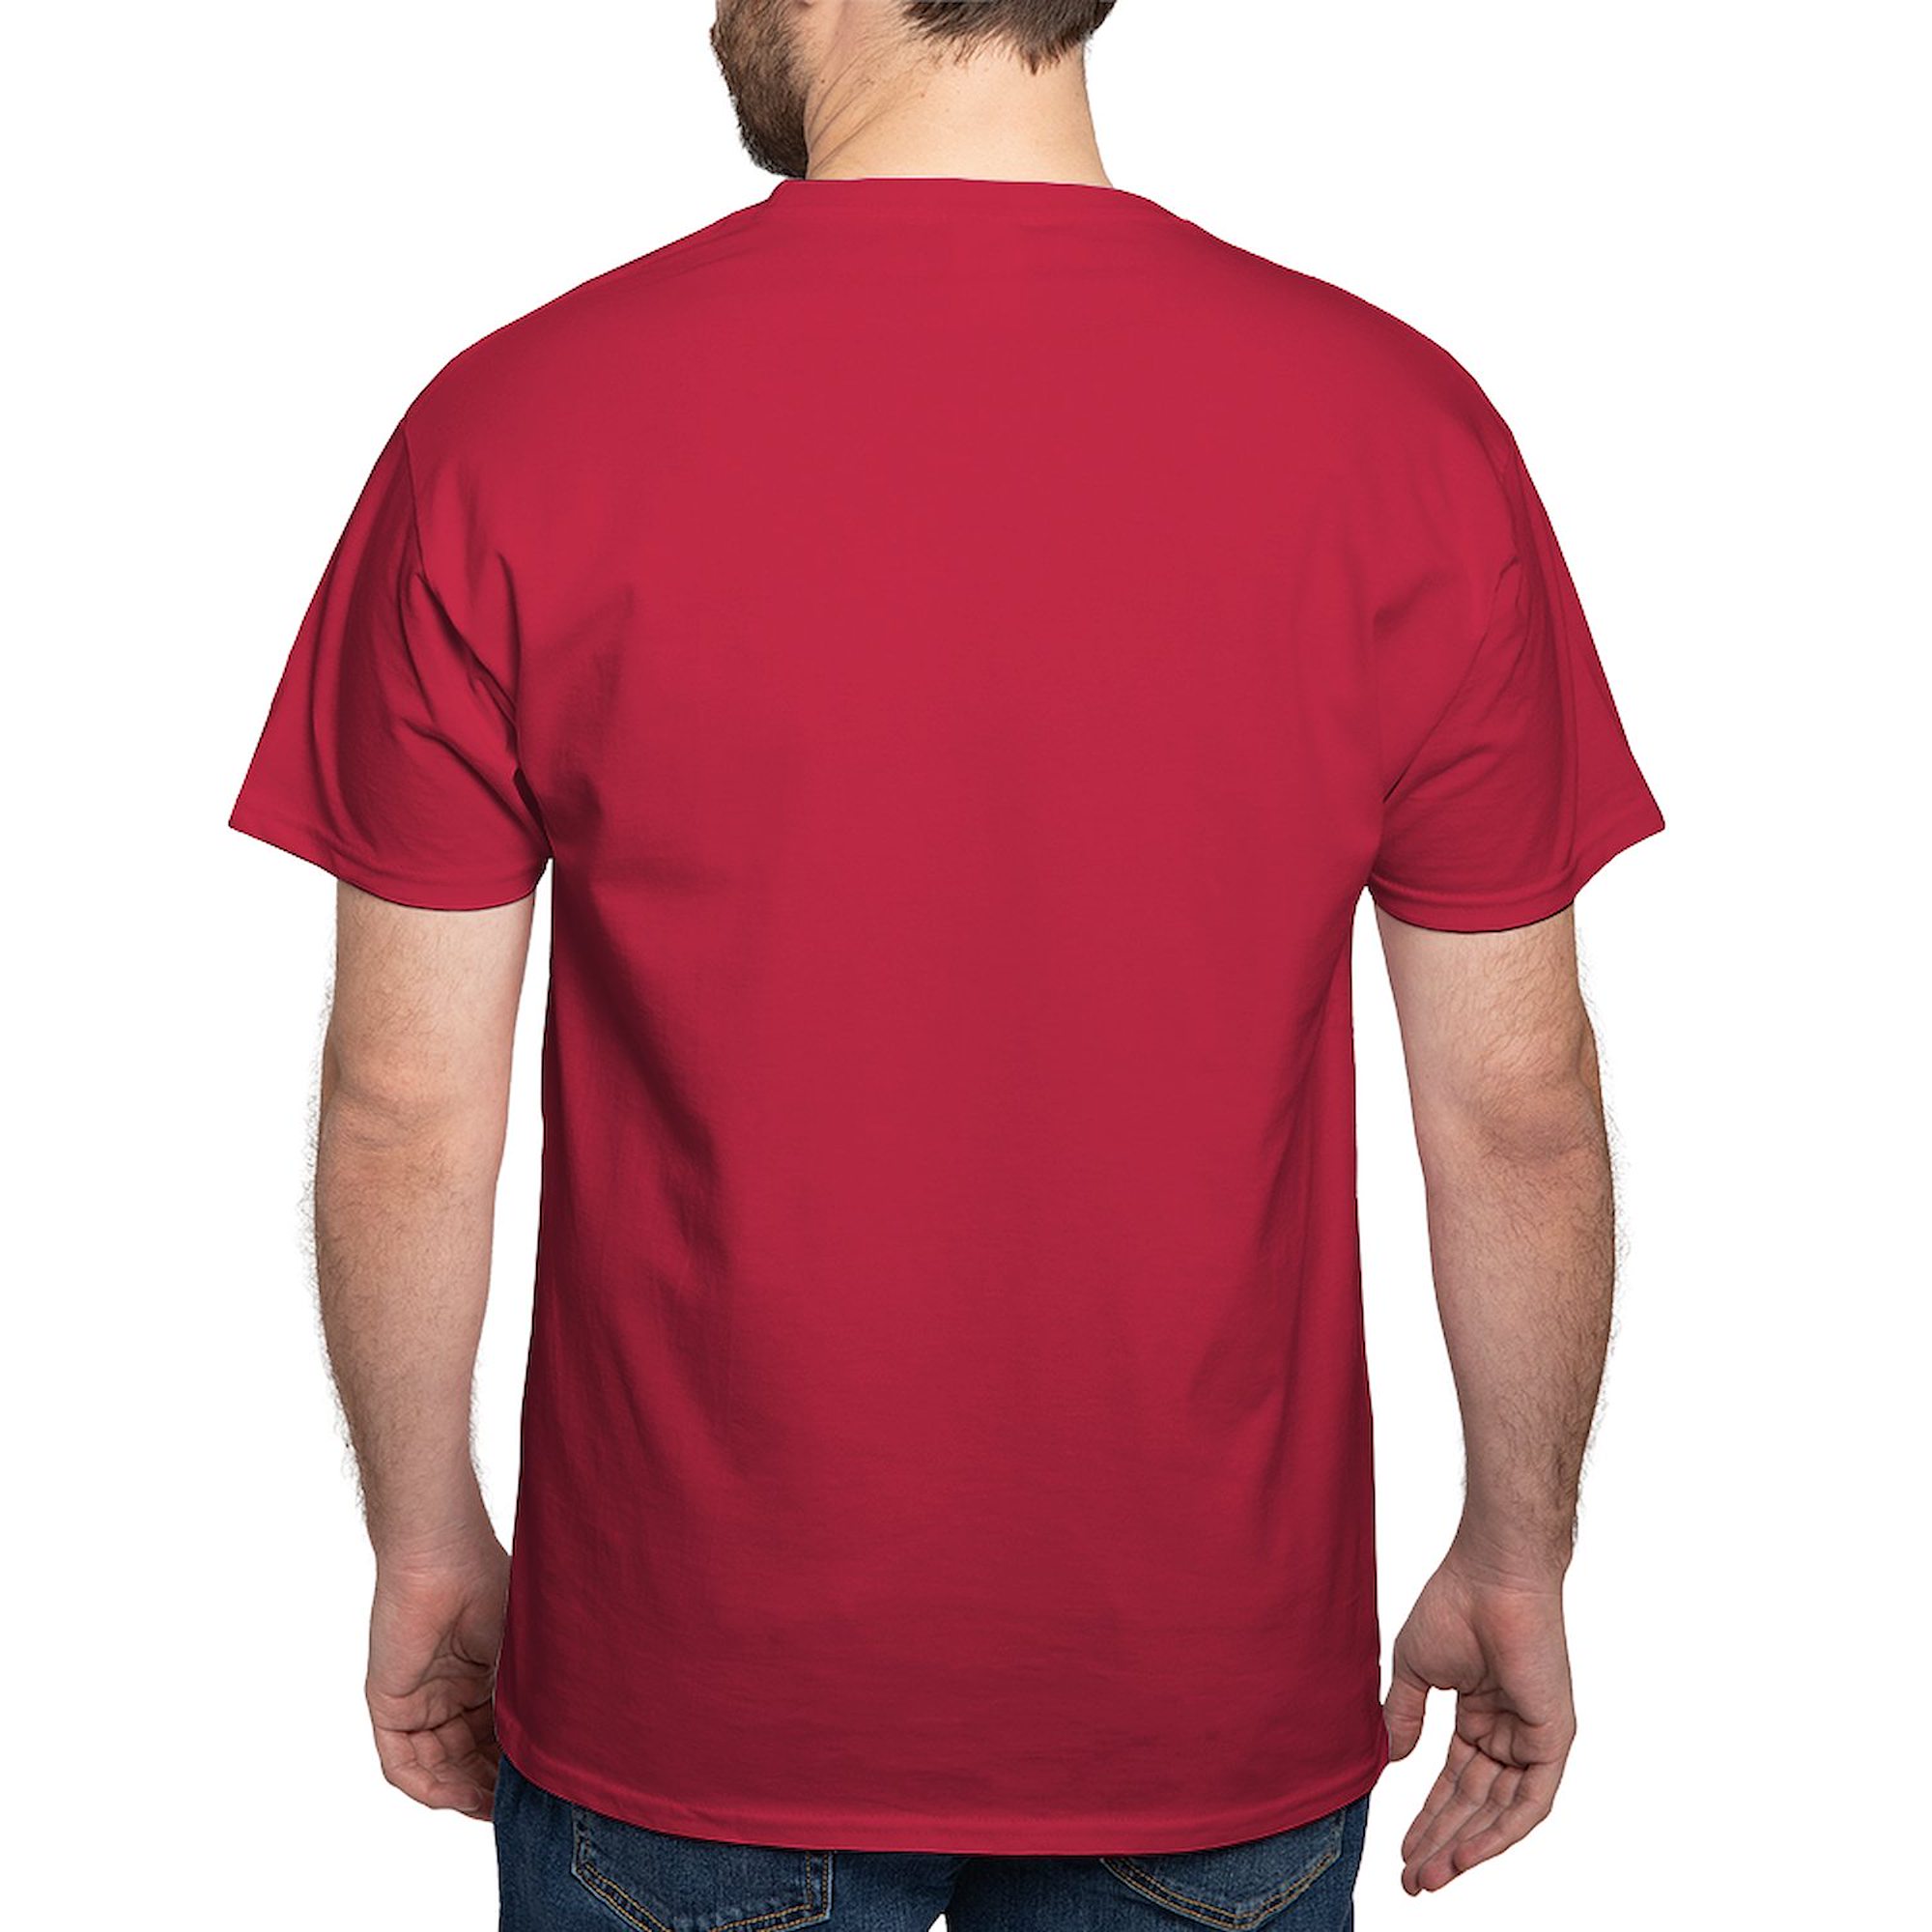 CafePress - I Wear This Shirt Periodically T Shirt - 100% Cotton T-Shirt - image 2 of 4